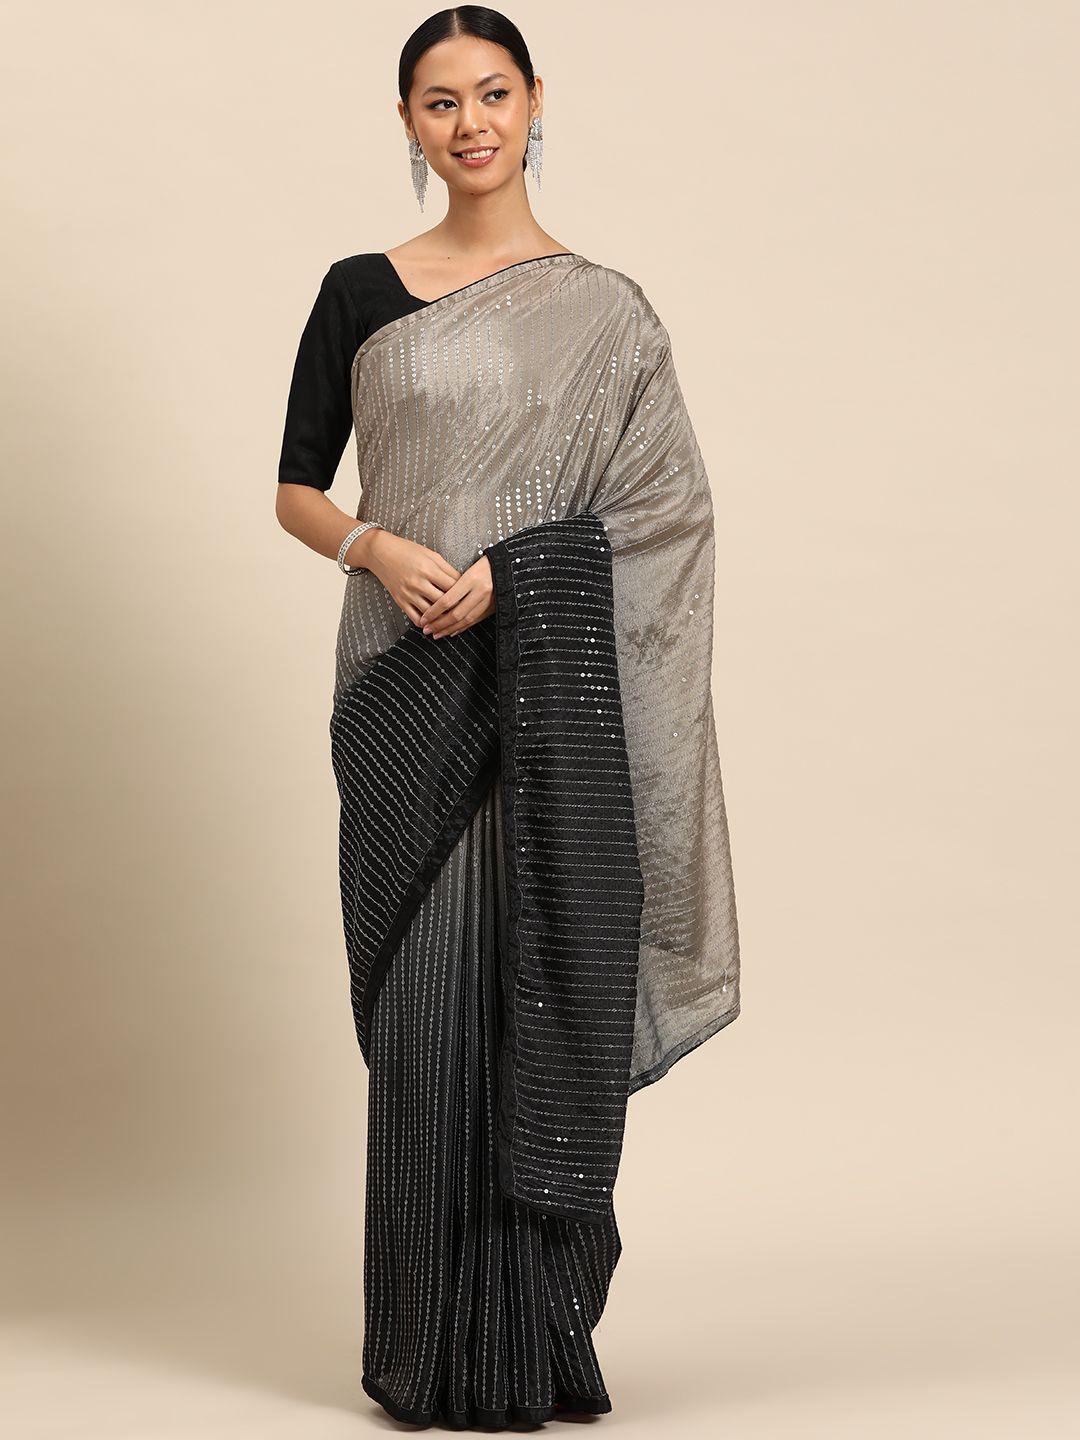 sutram woven design sequinned poly chiffon saree